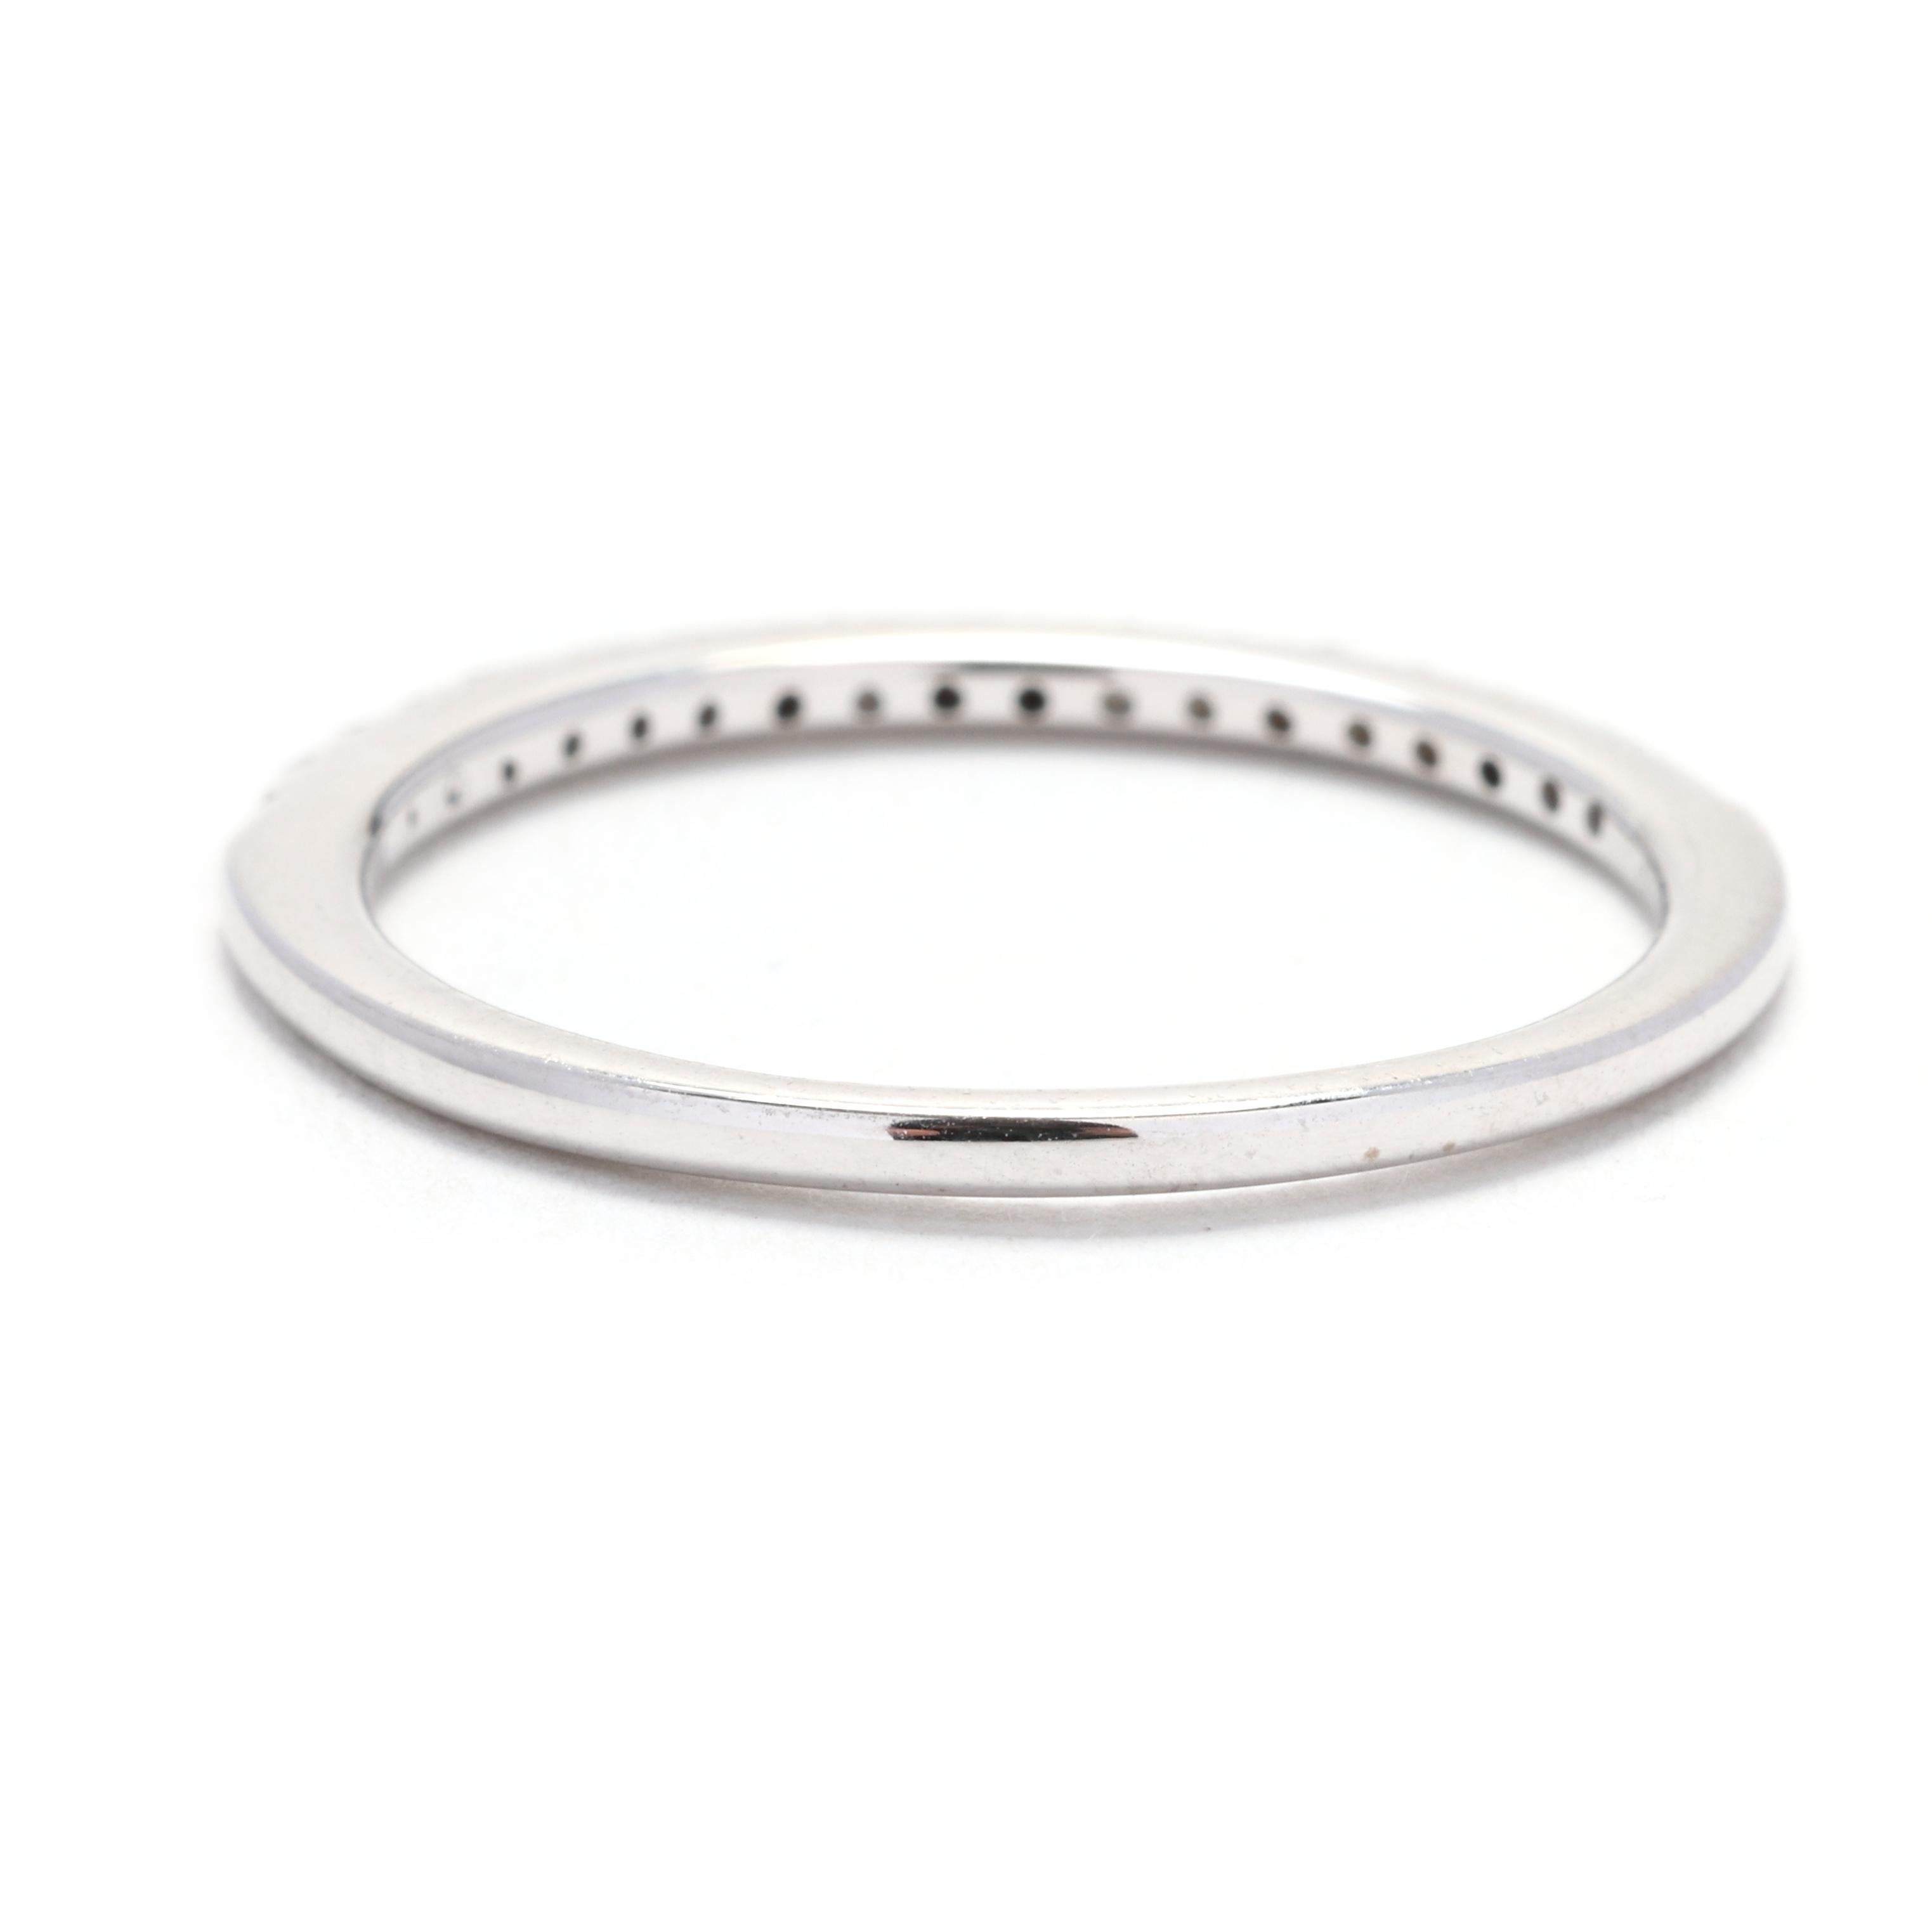 Taille brillant 0.10ctw Diamond Thin Band Ring, 14k White Gold, Taille de bague 7, empilable